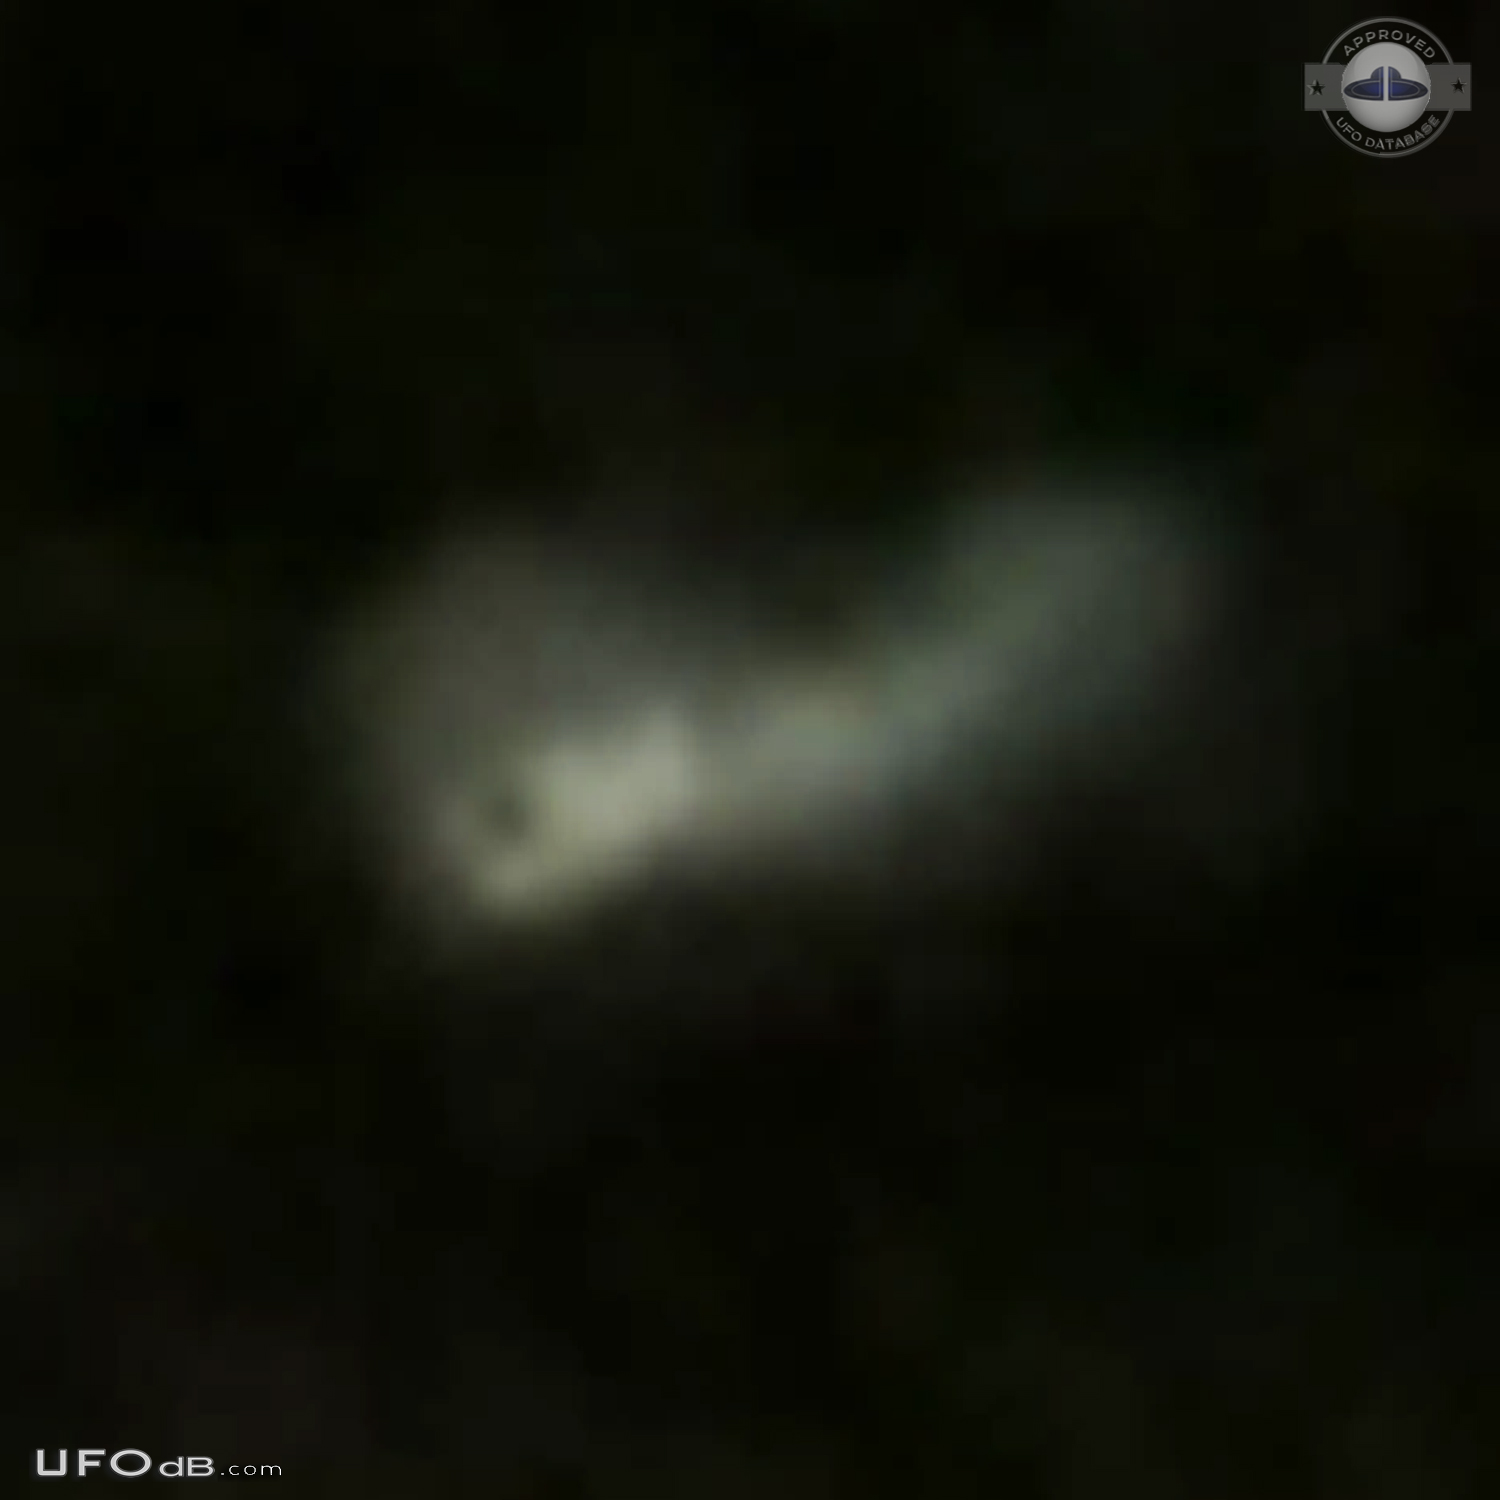 Looked like mothership with smaller glowing craft flying around it in  UFO Picture #708-5